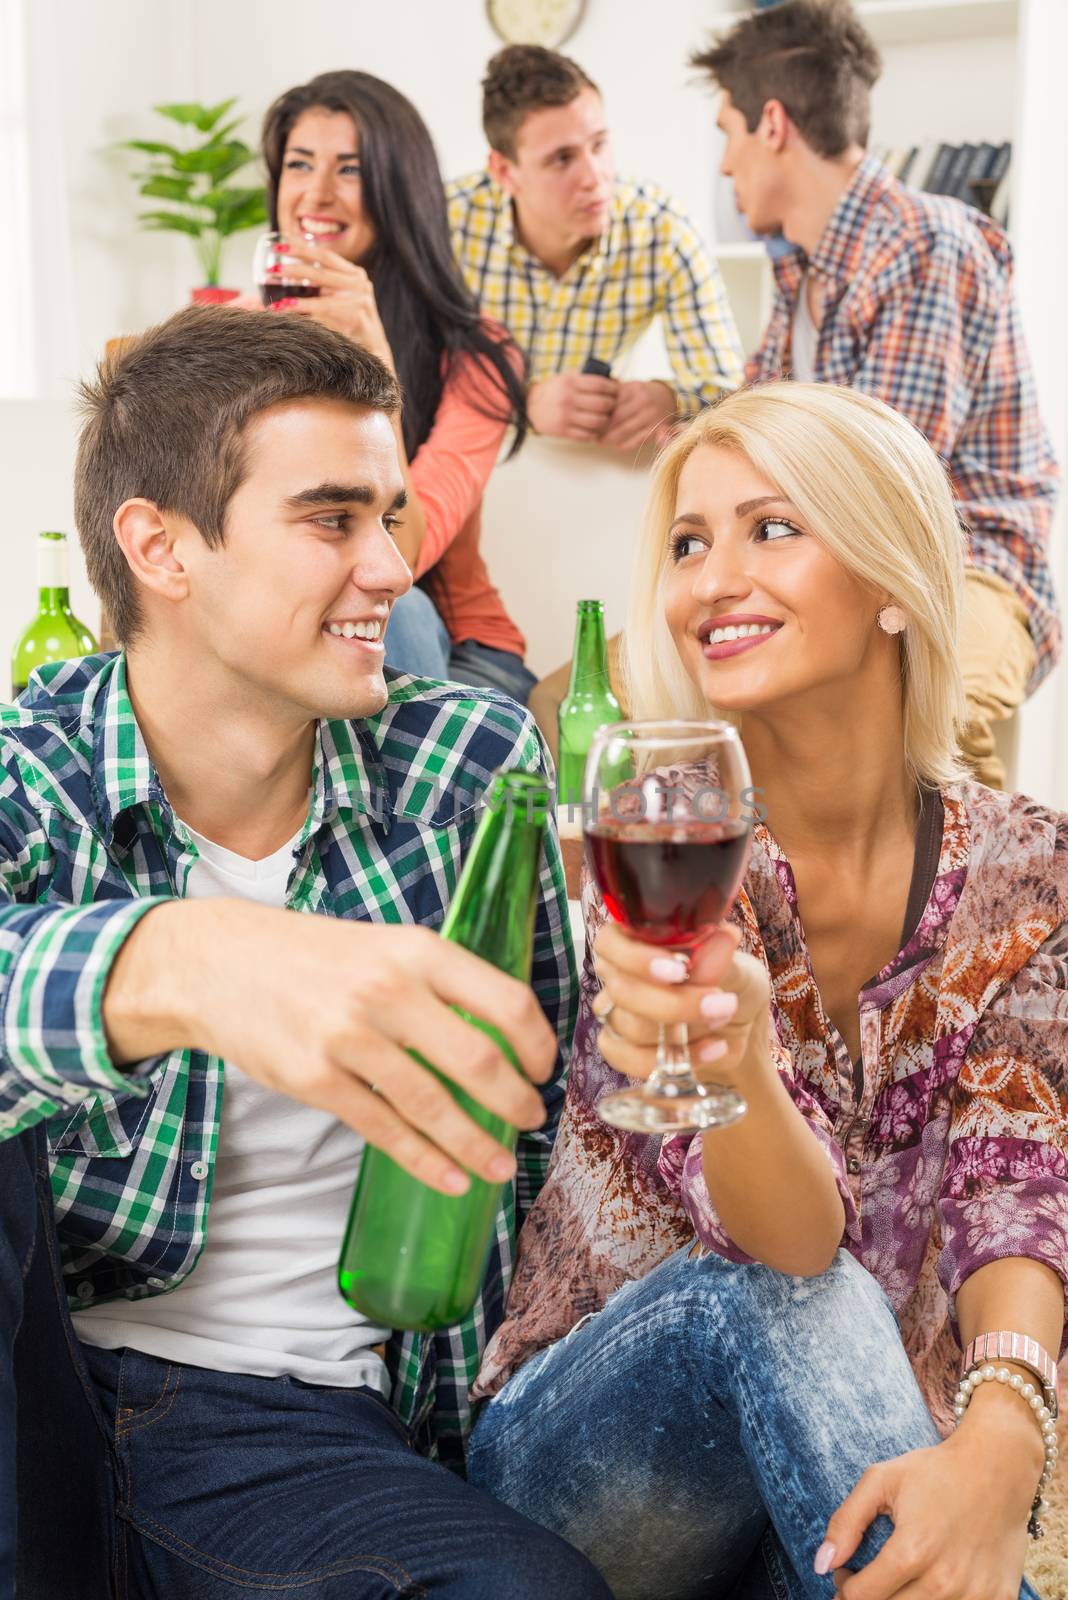 Young couple at a home party, sit on the floor and knocking with drinks, in the background you can see their friends who are sitting on the couch.